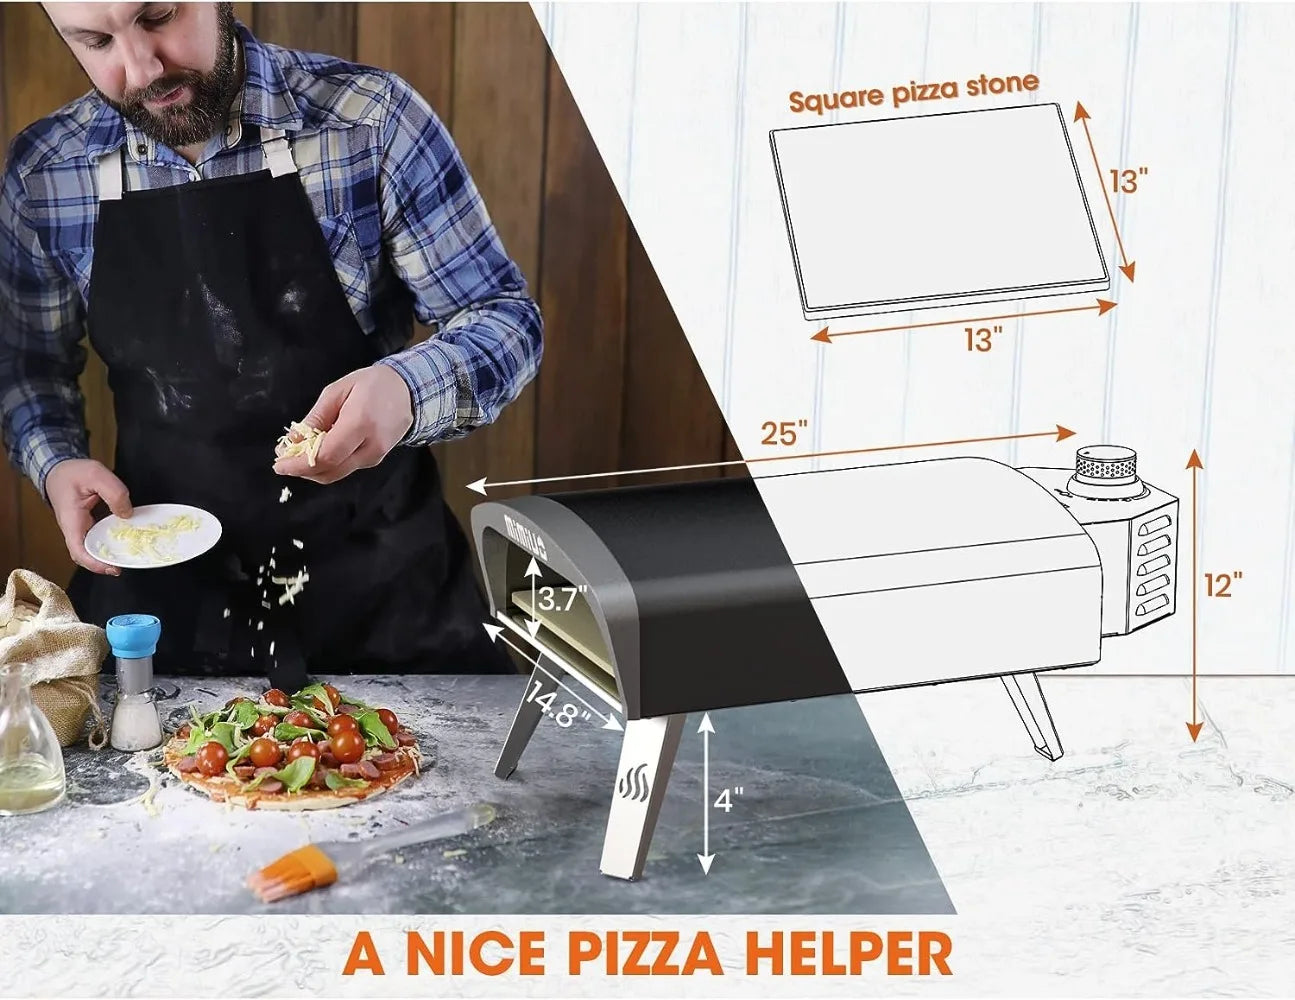 Portable Gas Powered Professional Pizza Stove Oven